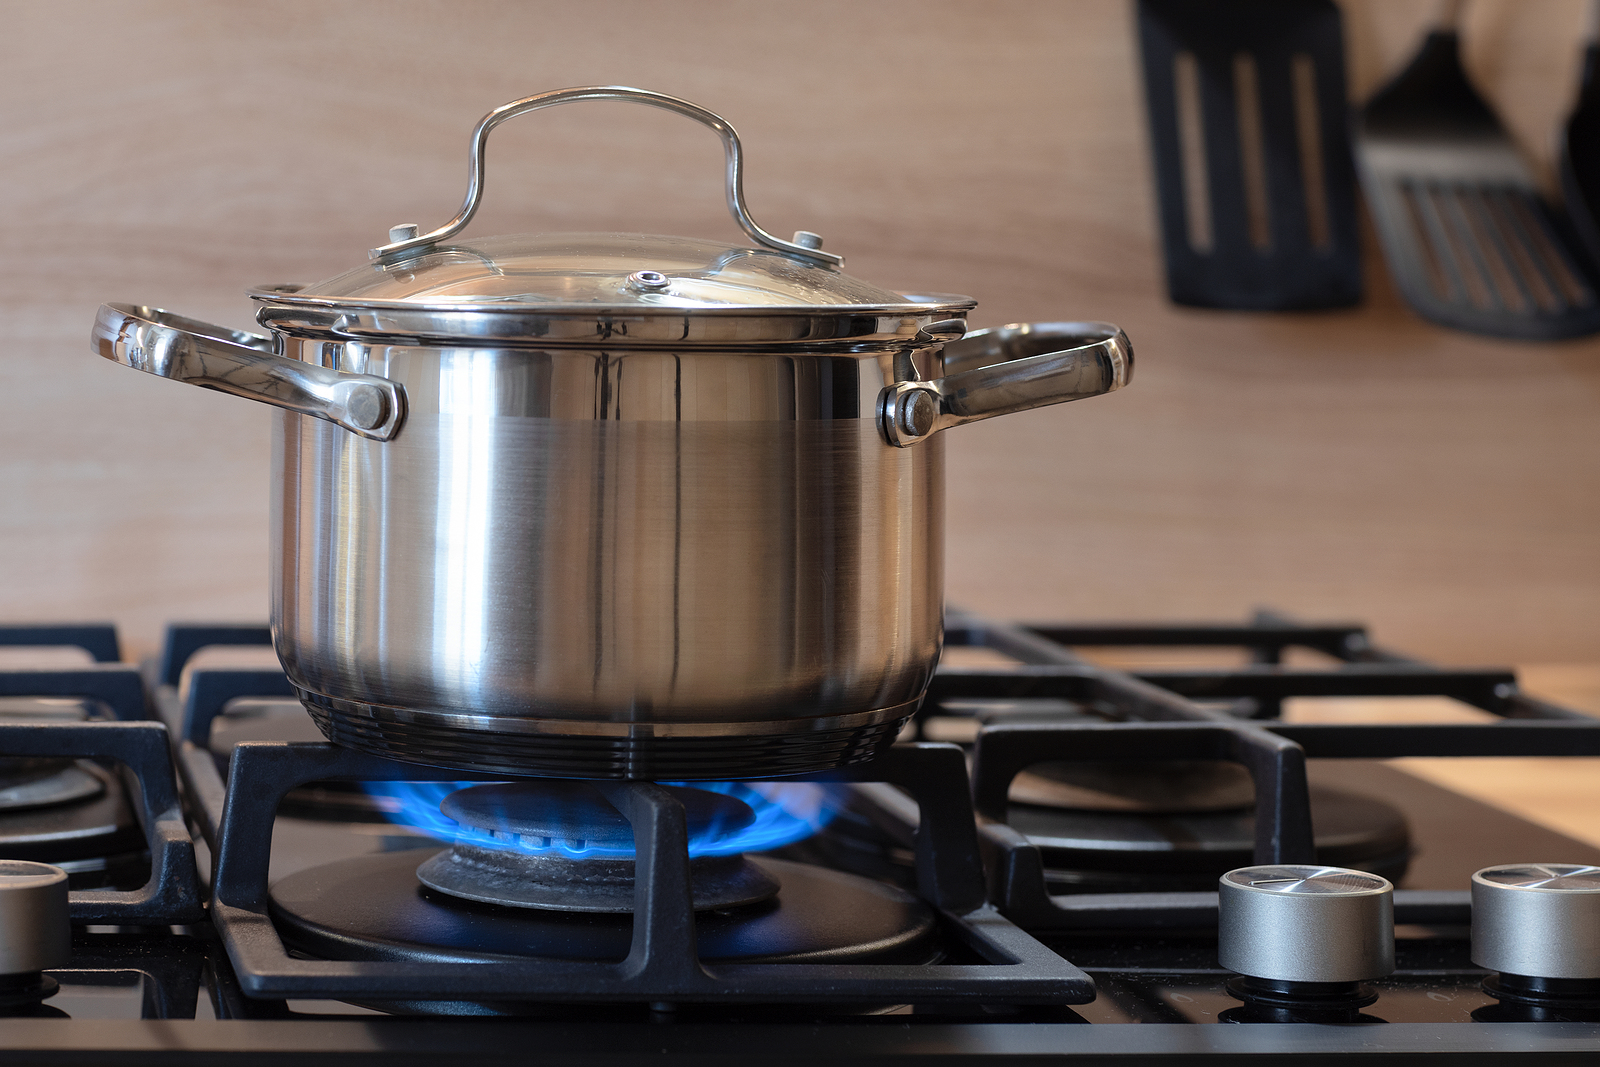 https://www.instituteforenergyresearch.org/wp-content/uploads/2023/01/bigstock-Pot-On-Gas-Stove-Stainless-Pa-462382401.jpg